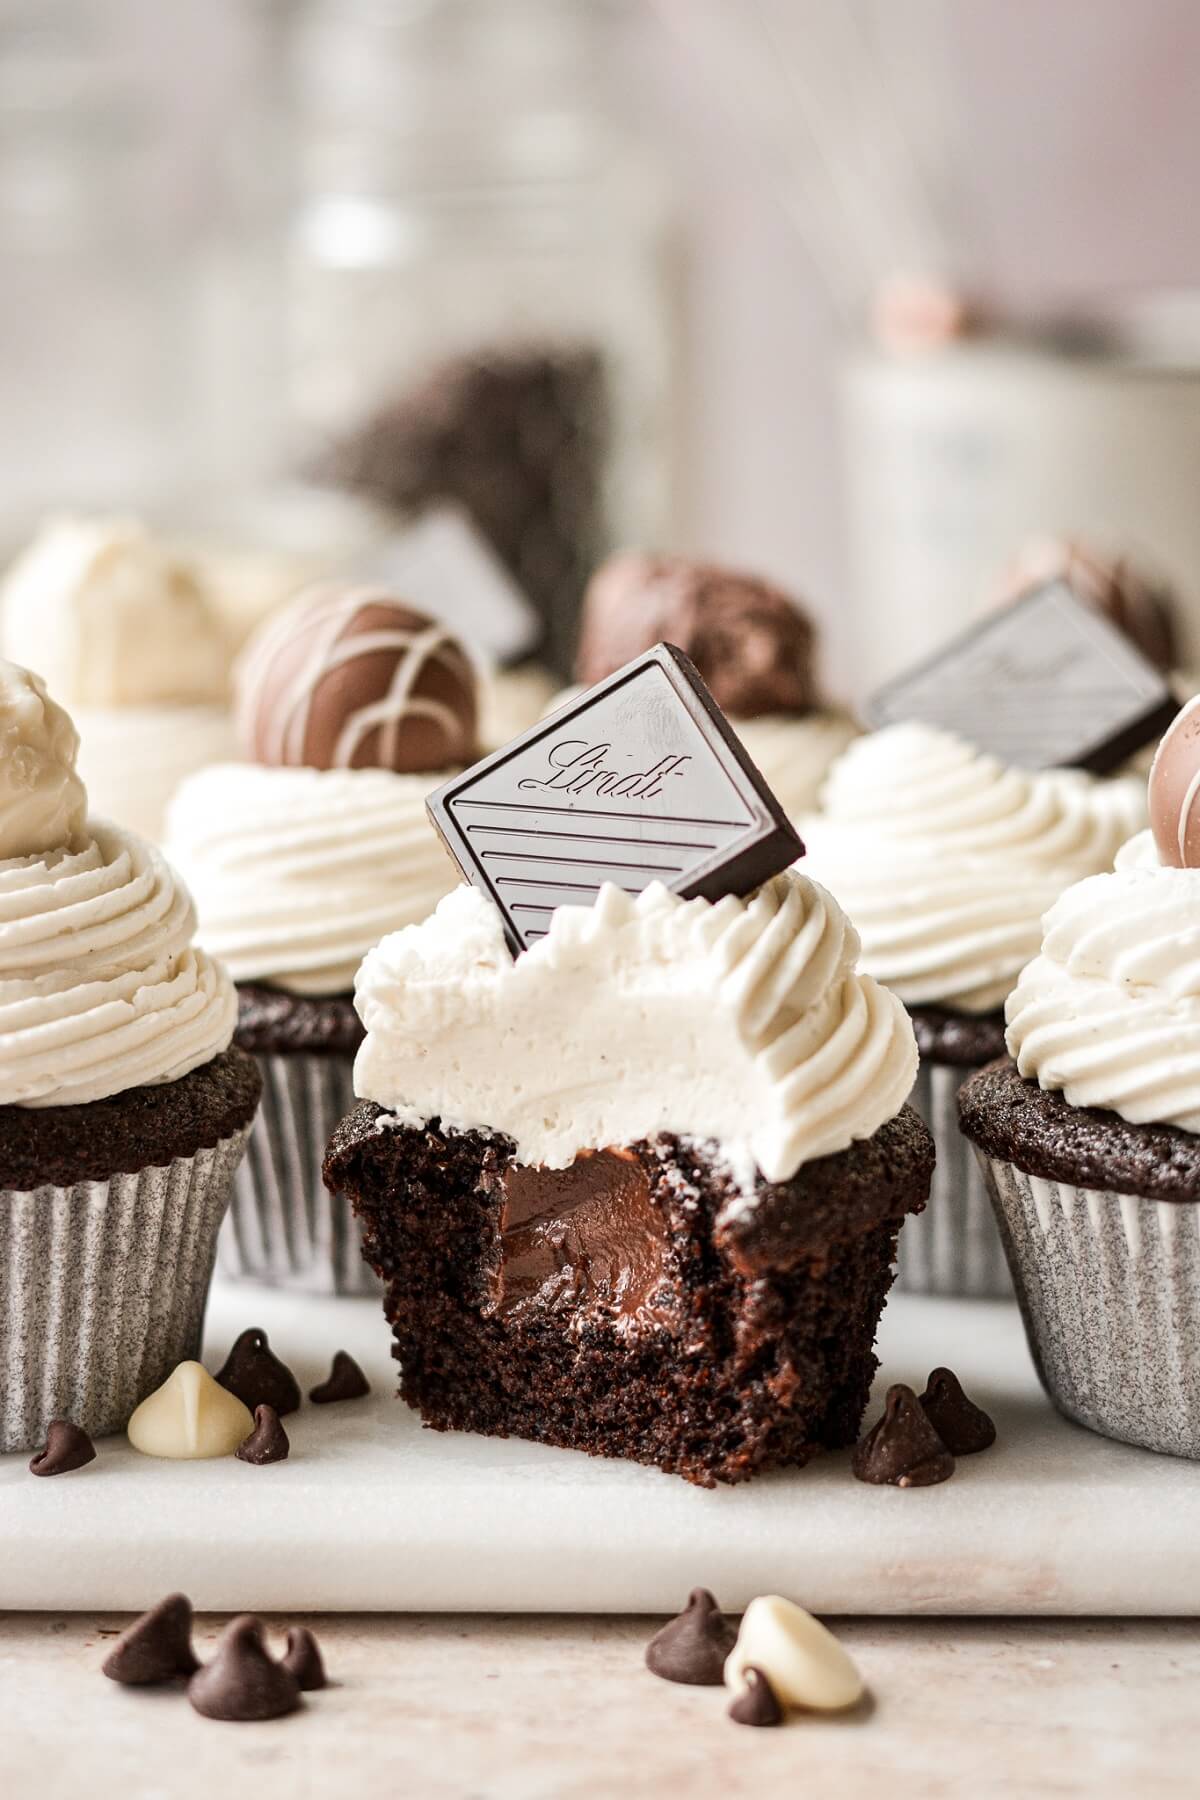 Black and white chocolate cupcakes, one with a bite taken.